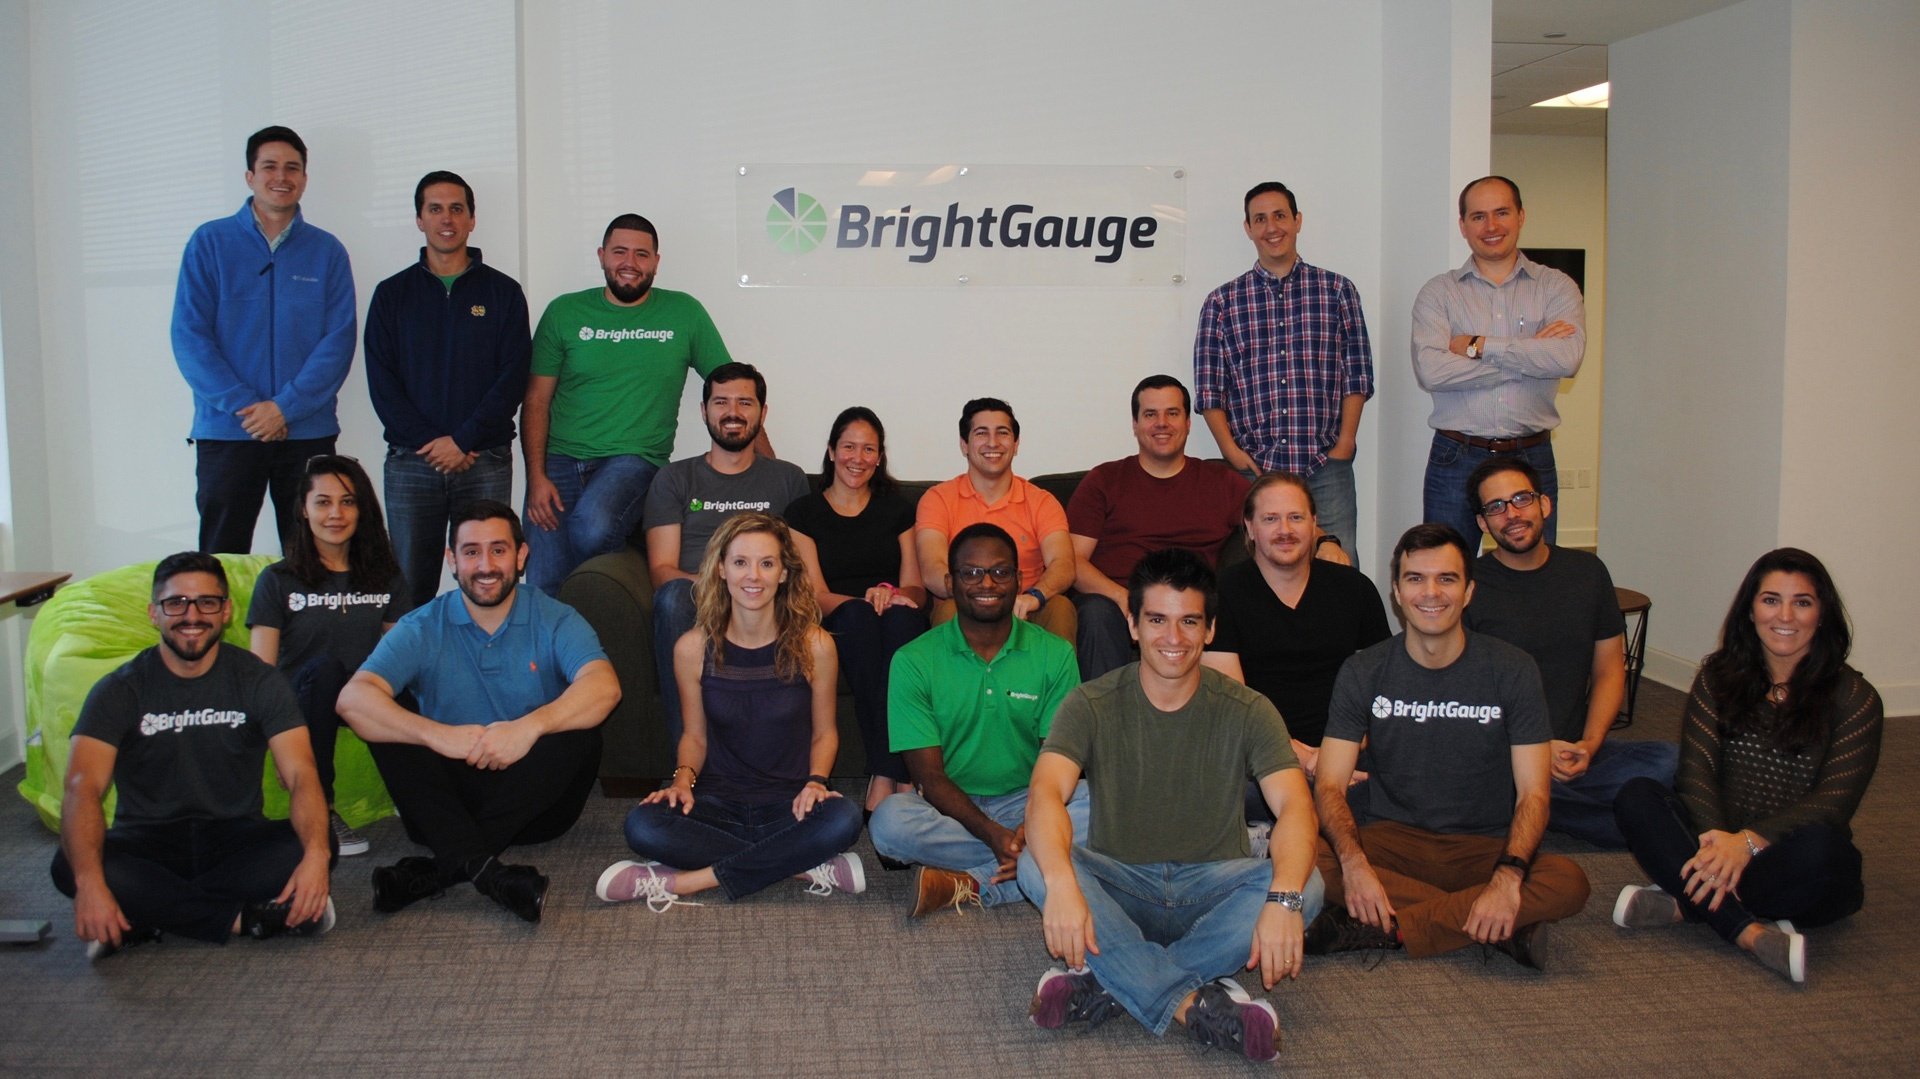 Brian Dosal Celebrates 5 Years Since Co-Founding BrightGauge